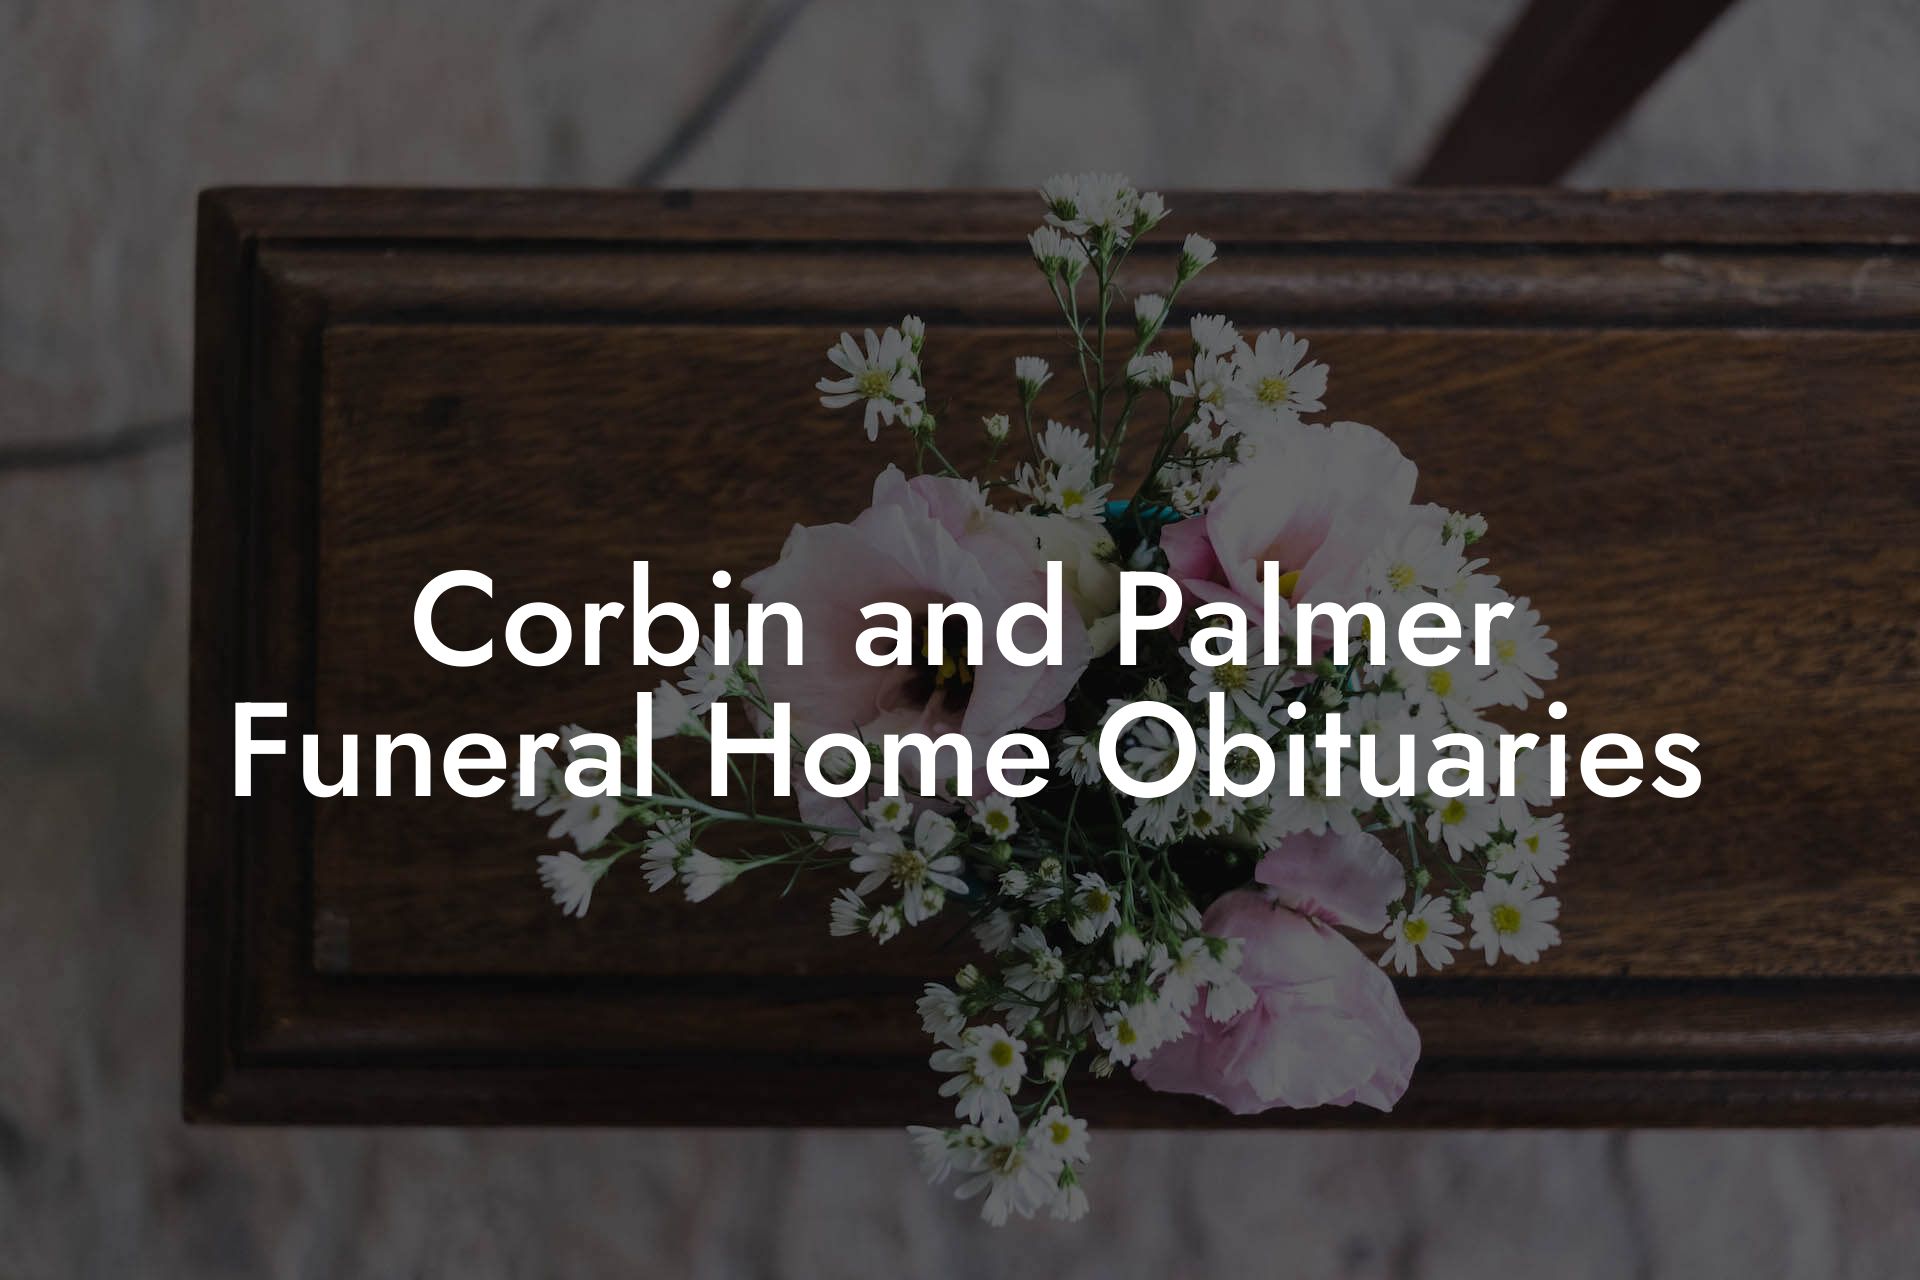 Corbin and Palmer Funeral Home Obituaries